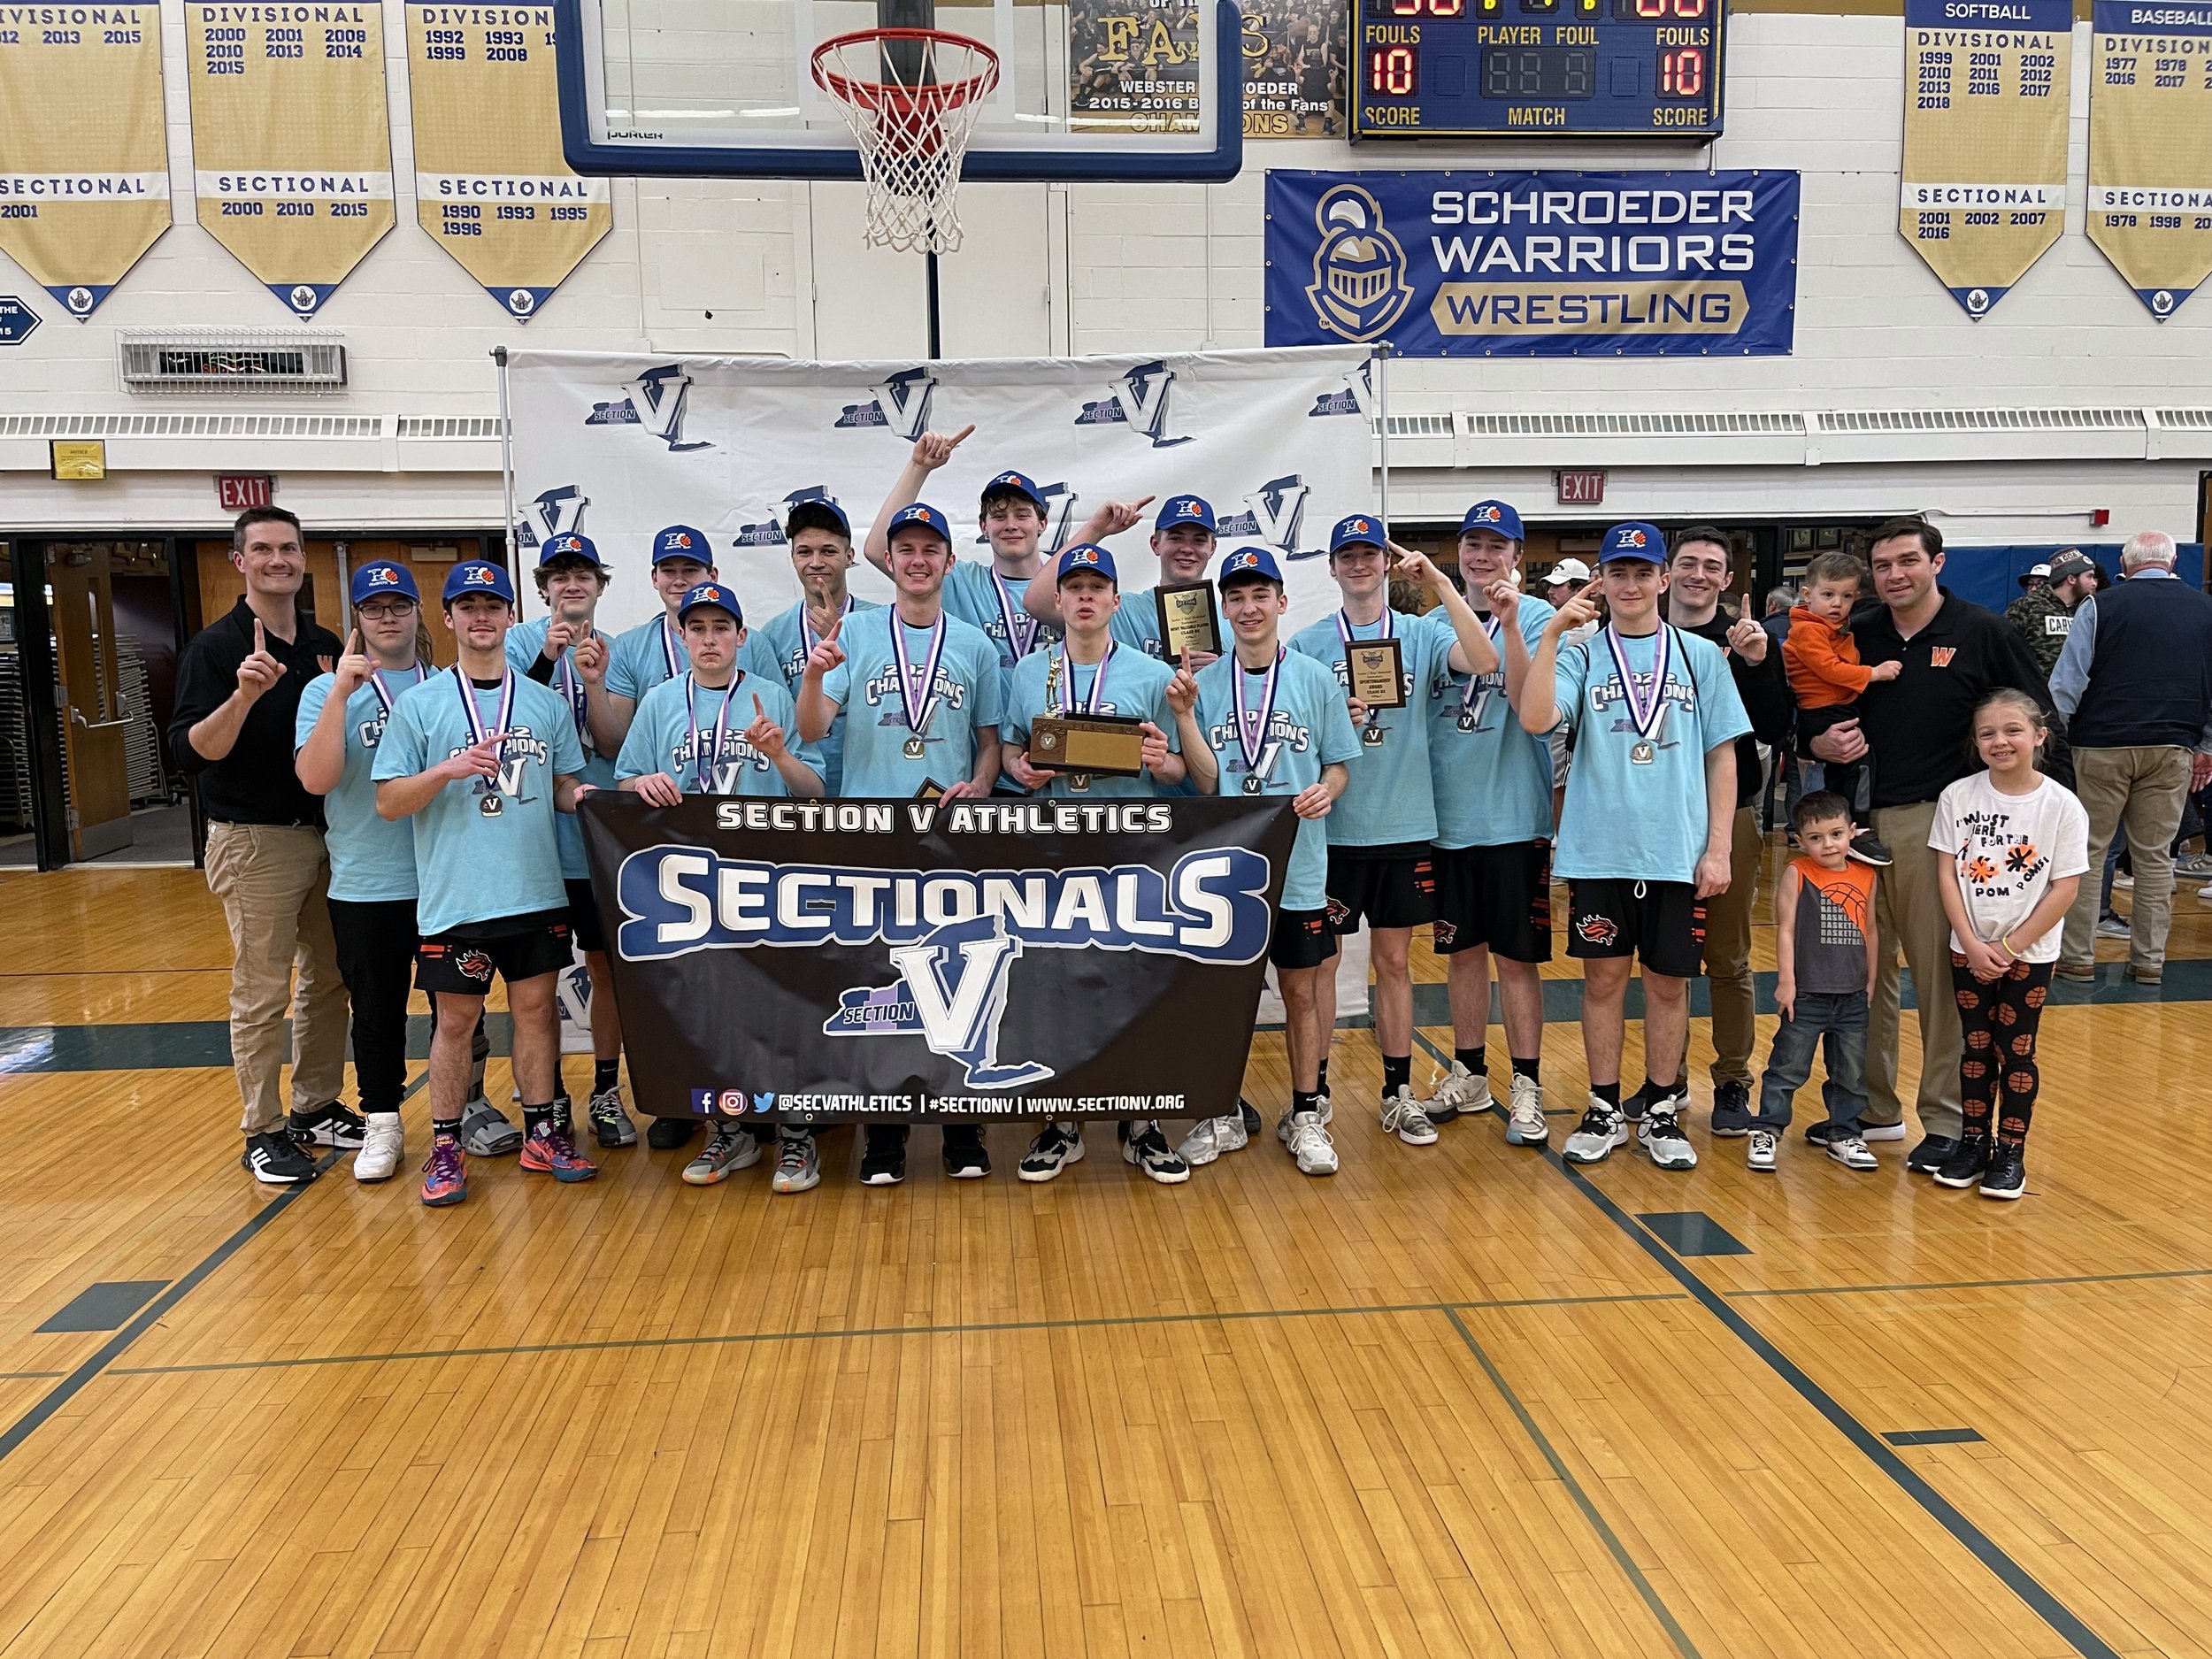  The Wellsville Lions come together for a team photo with their newly-captured Class B2 Championship brick, after they defeated the Mynderse Blue Devils by a 66-58 count on Saturday at Webster Schroeder. [Chris Brooks/WellsvilleSports.com] 